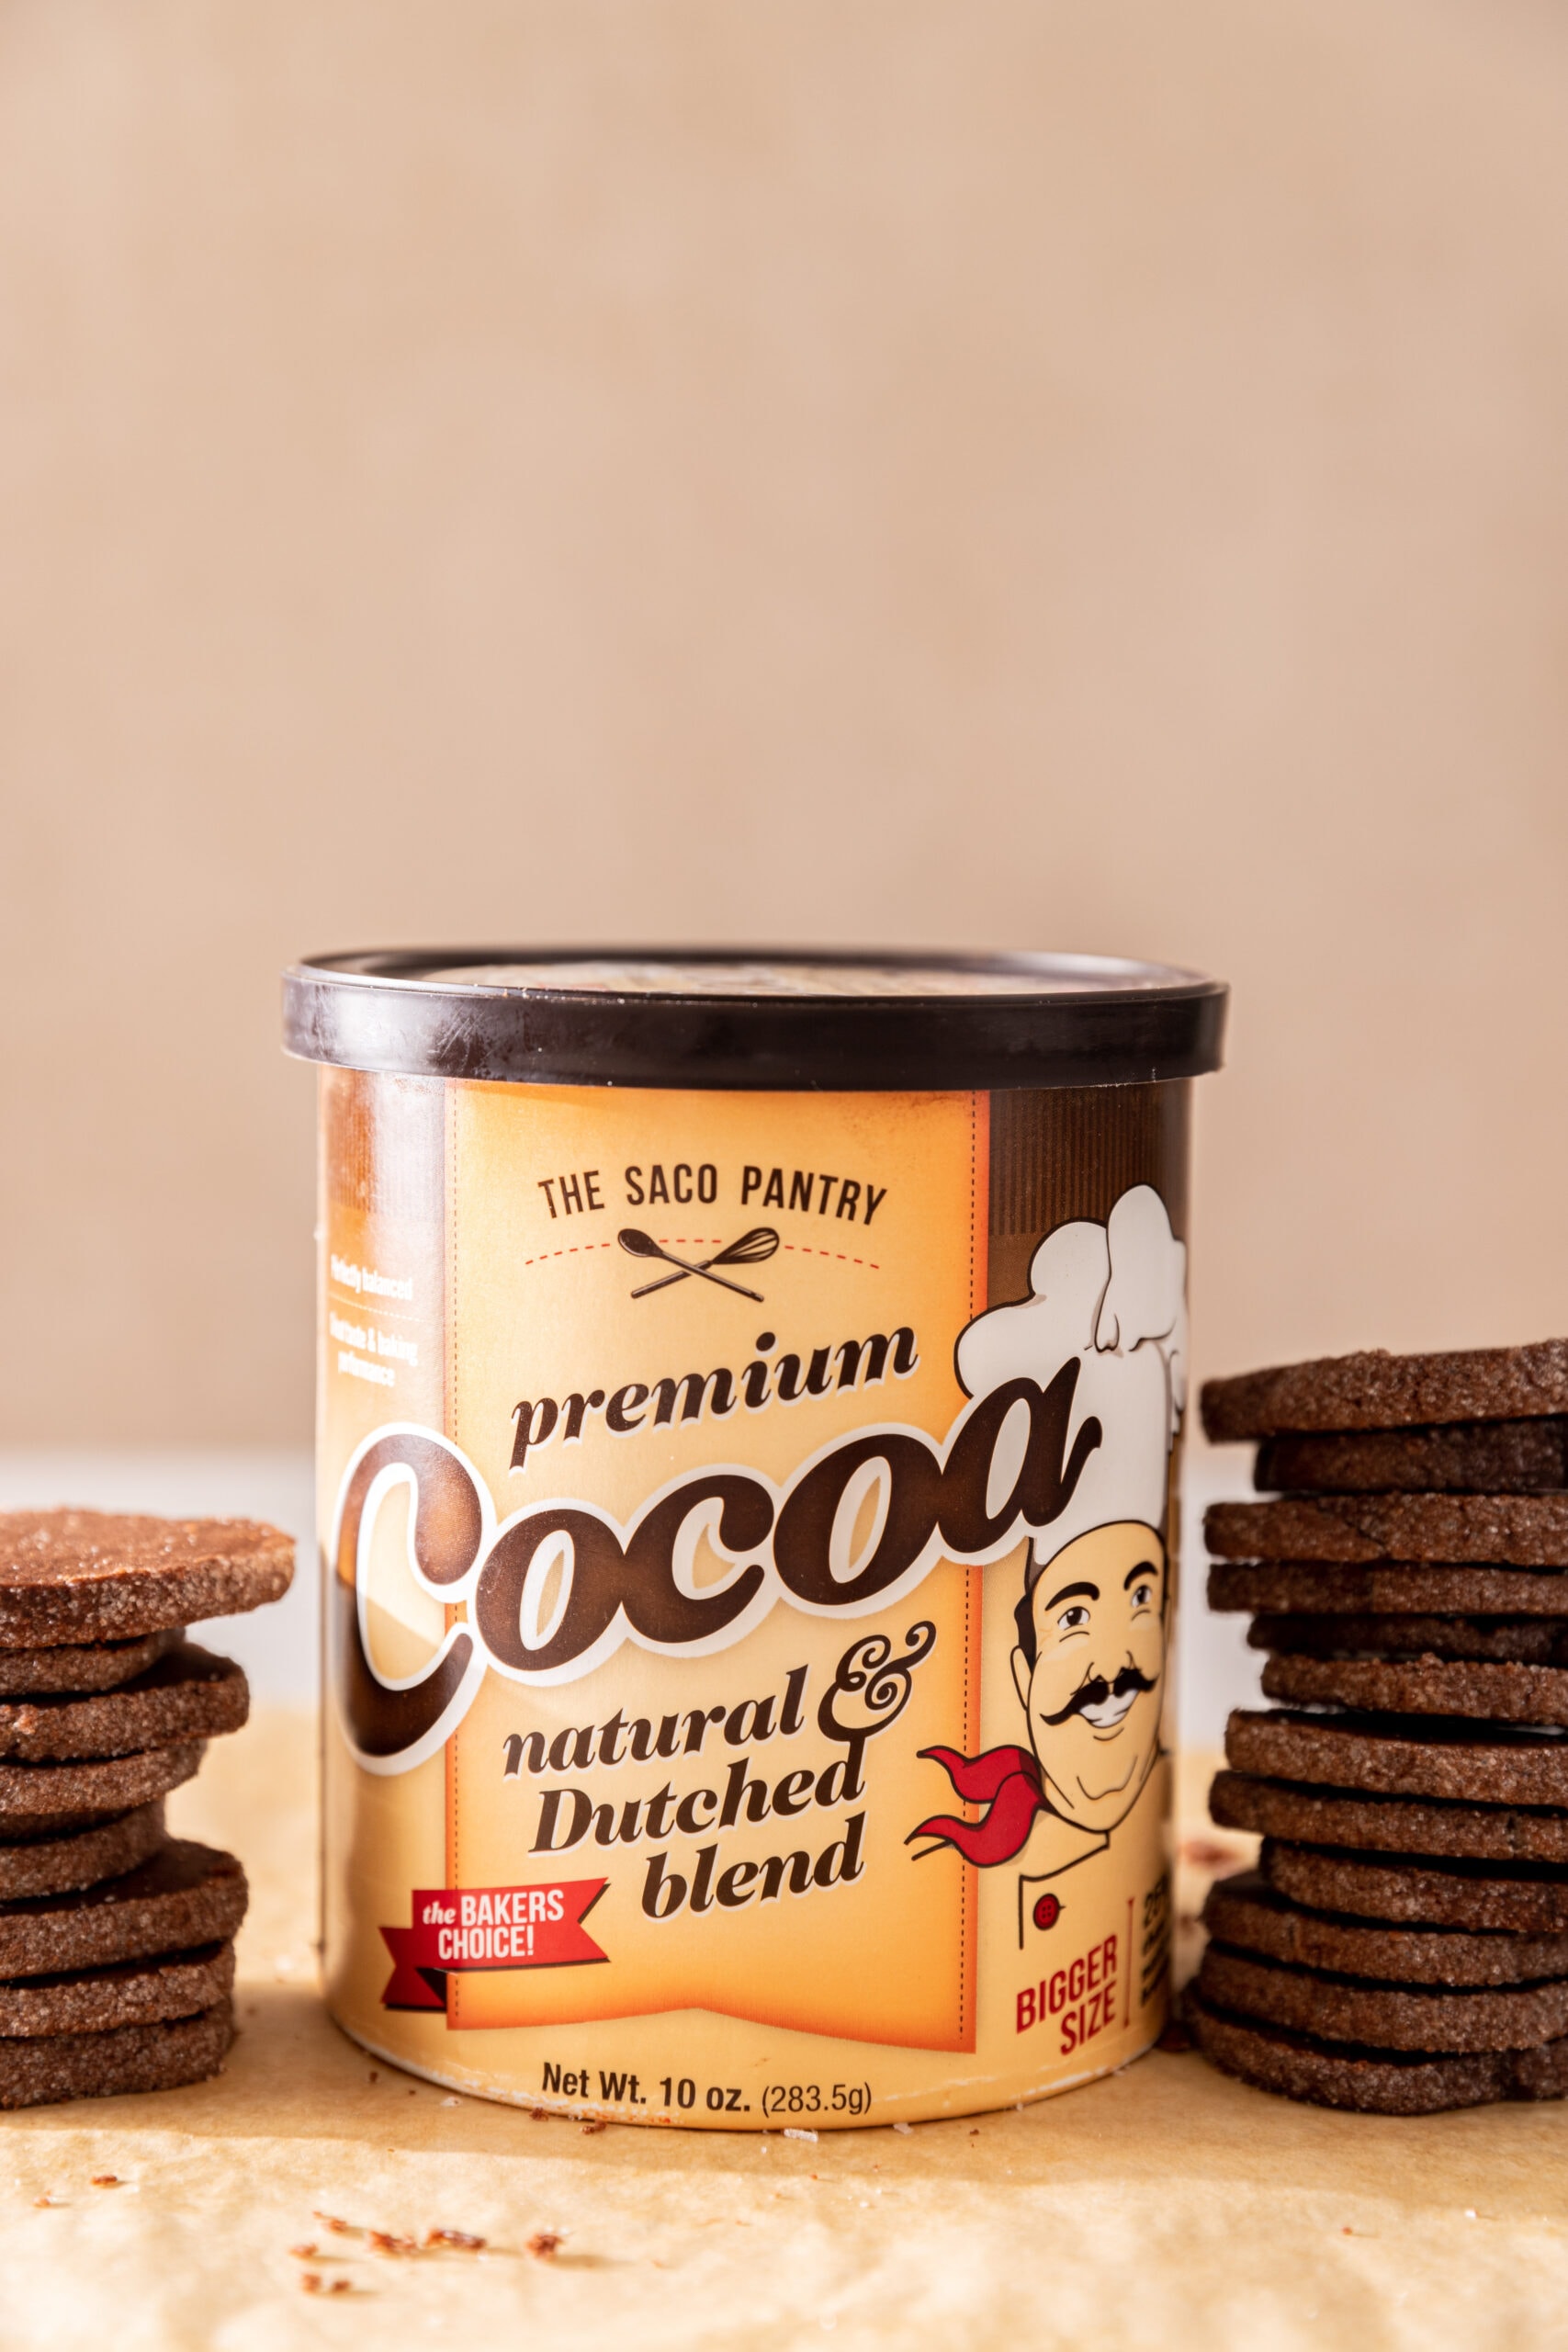 Large container of SACO Pantry Premium cocoa with two stacks of chocolate cookies.